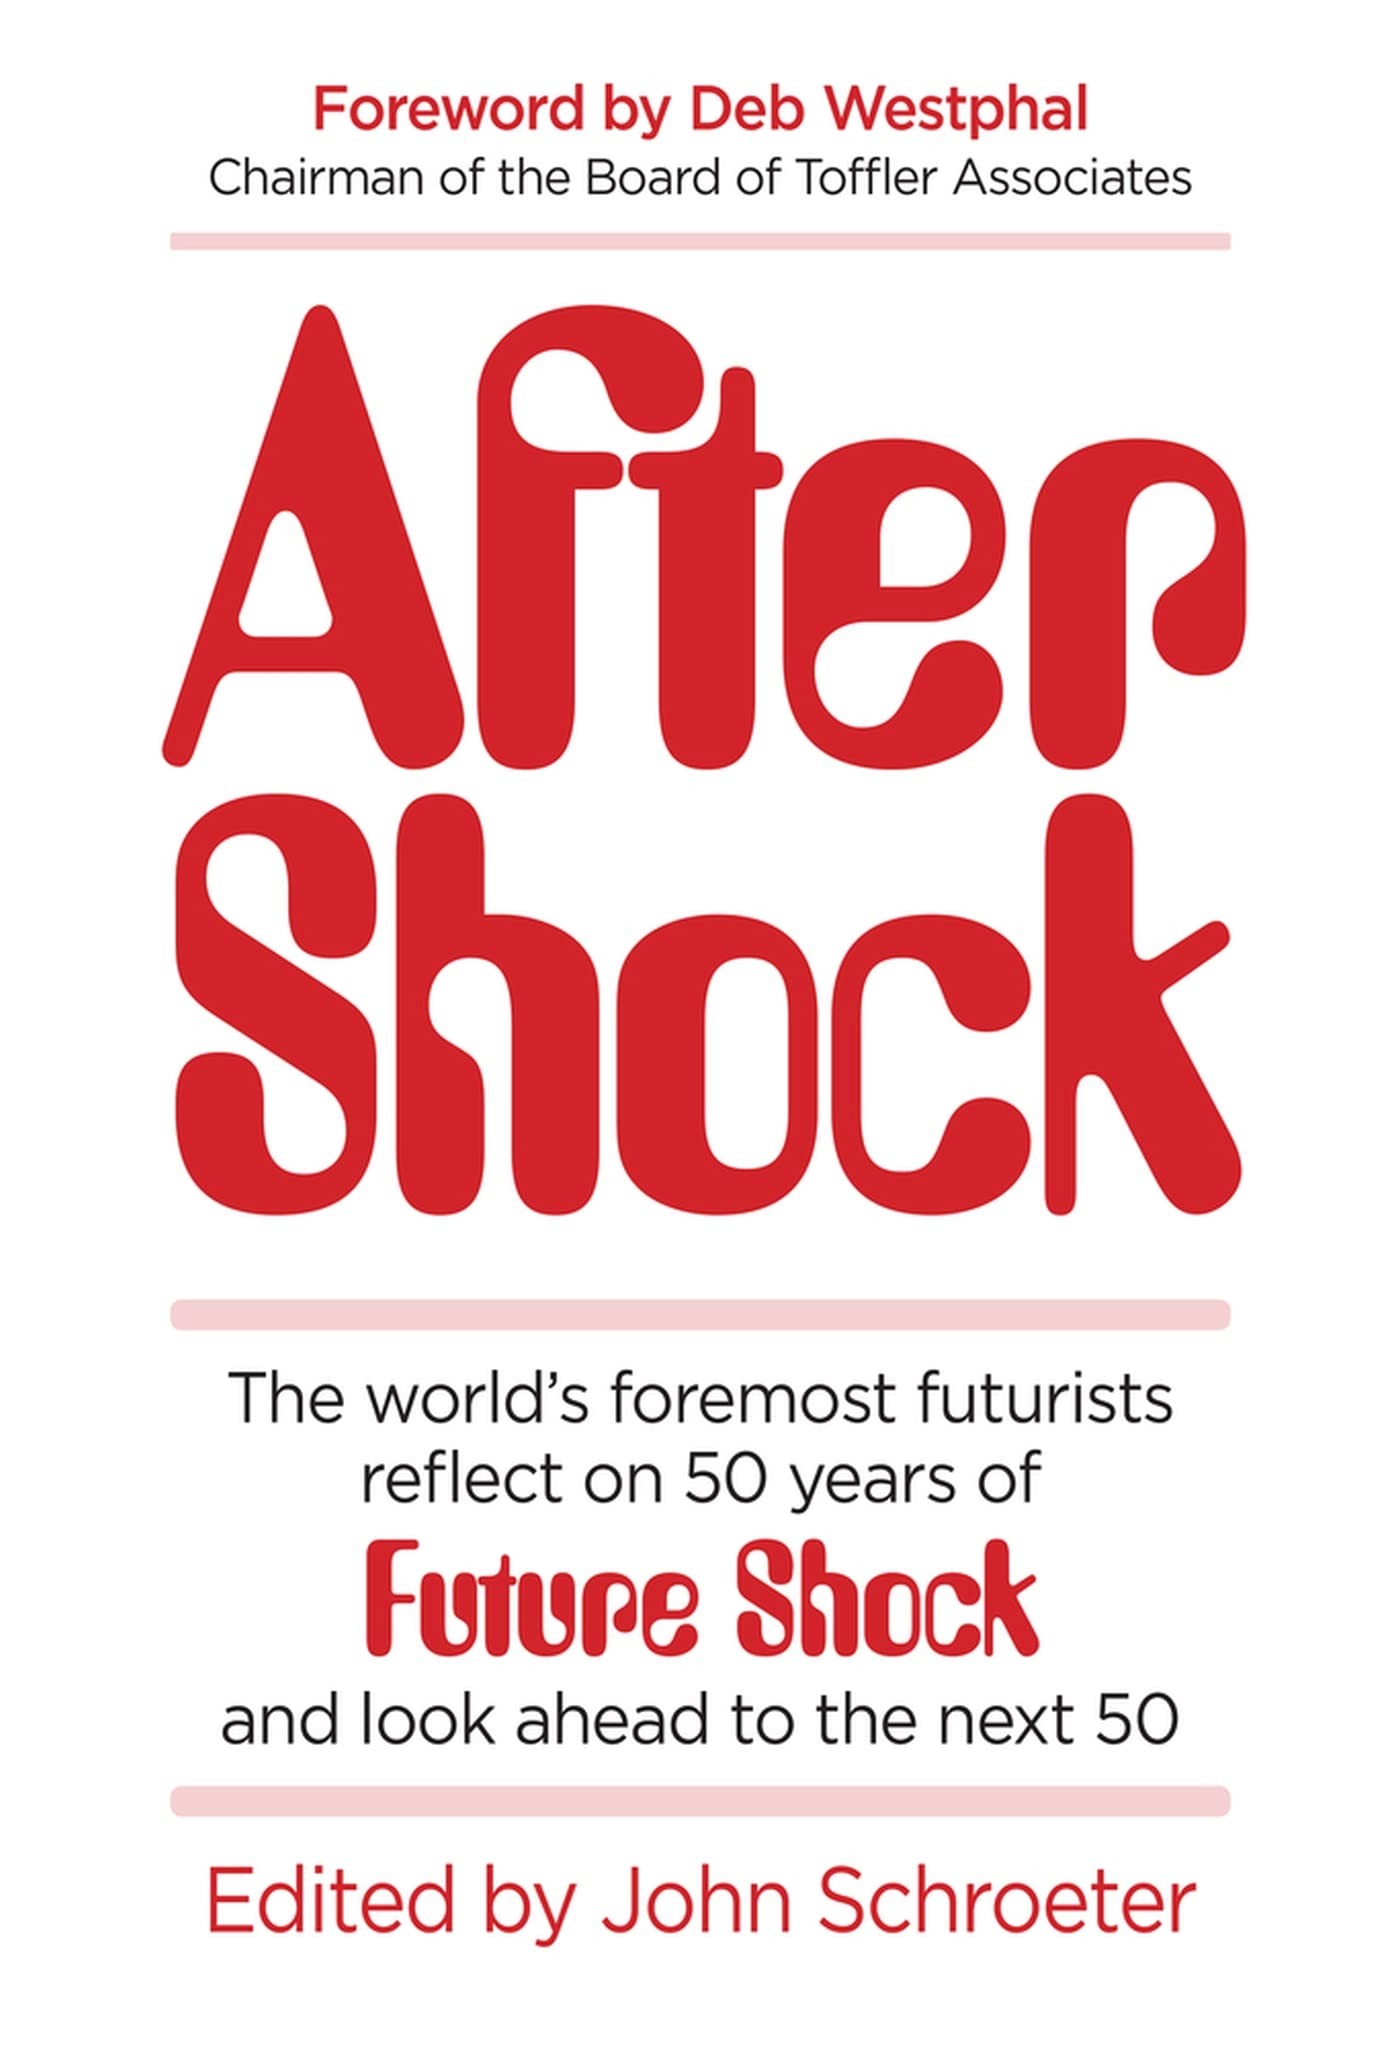 After Shock: The World's Foremost Futurists Reflect on 50 Years of Future Shock - and Look Ahead to the Next 50